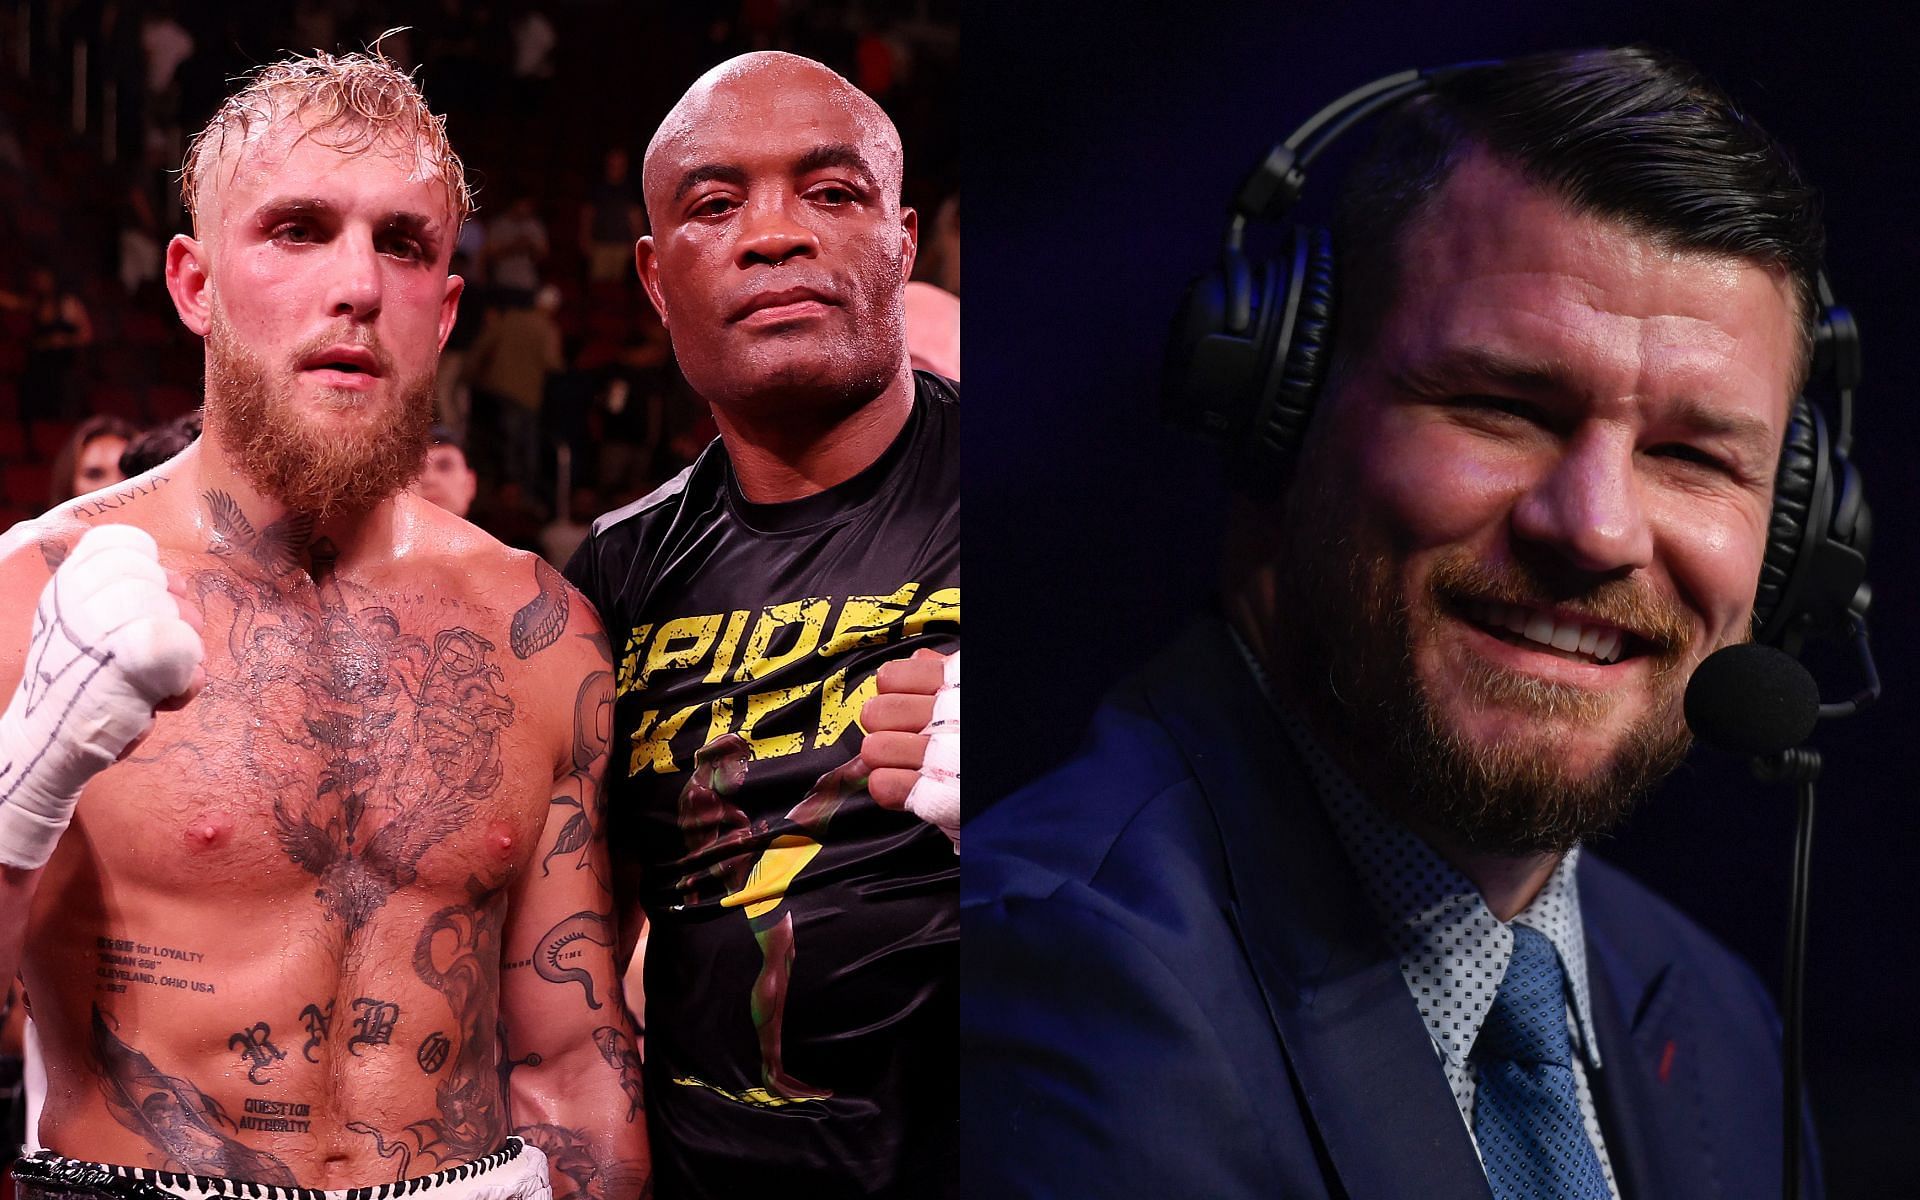 Jake Paul and Anderson Silva (left) and Michael Bisping (right) [Image Courtesy: Getty Images]